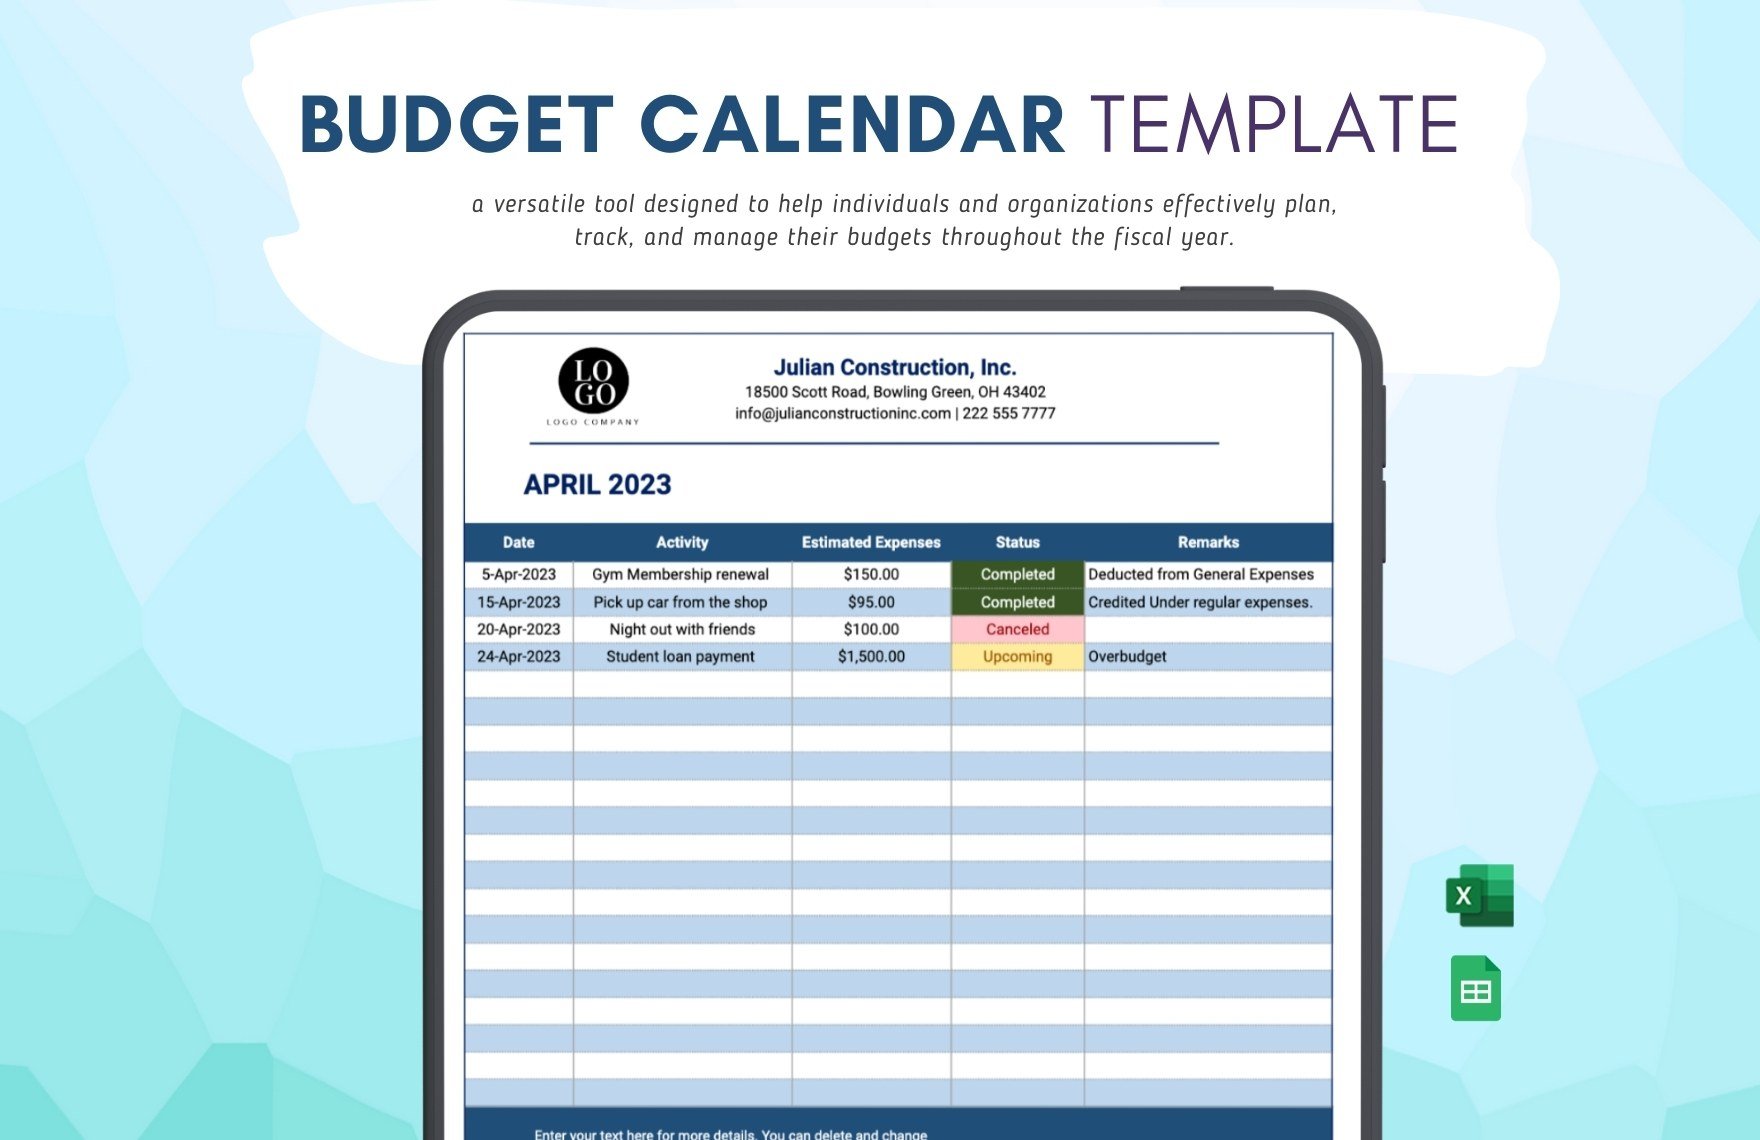 Budget Calendar Template in Excel, Google Sheets